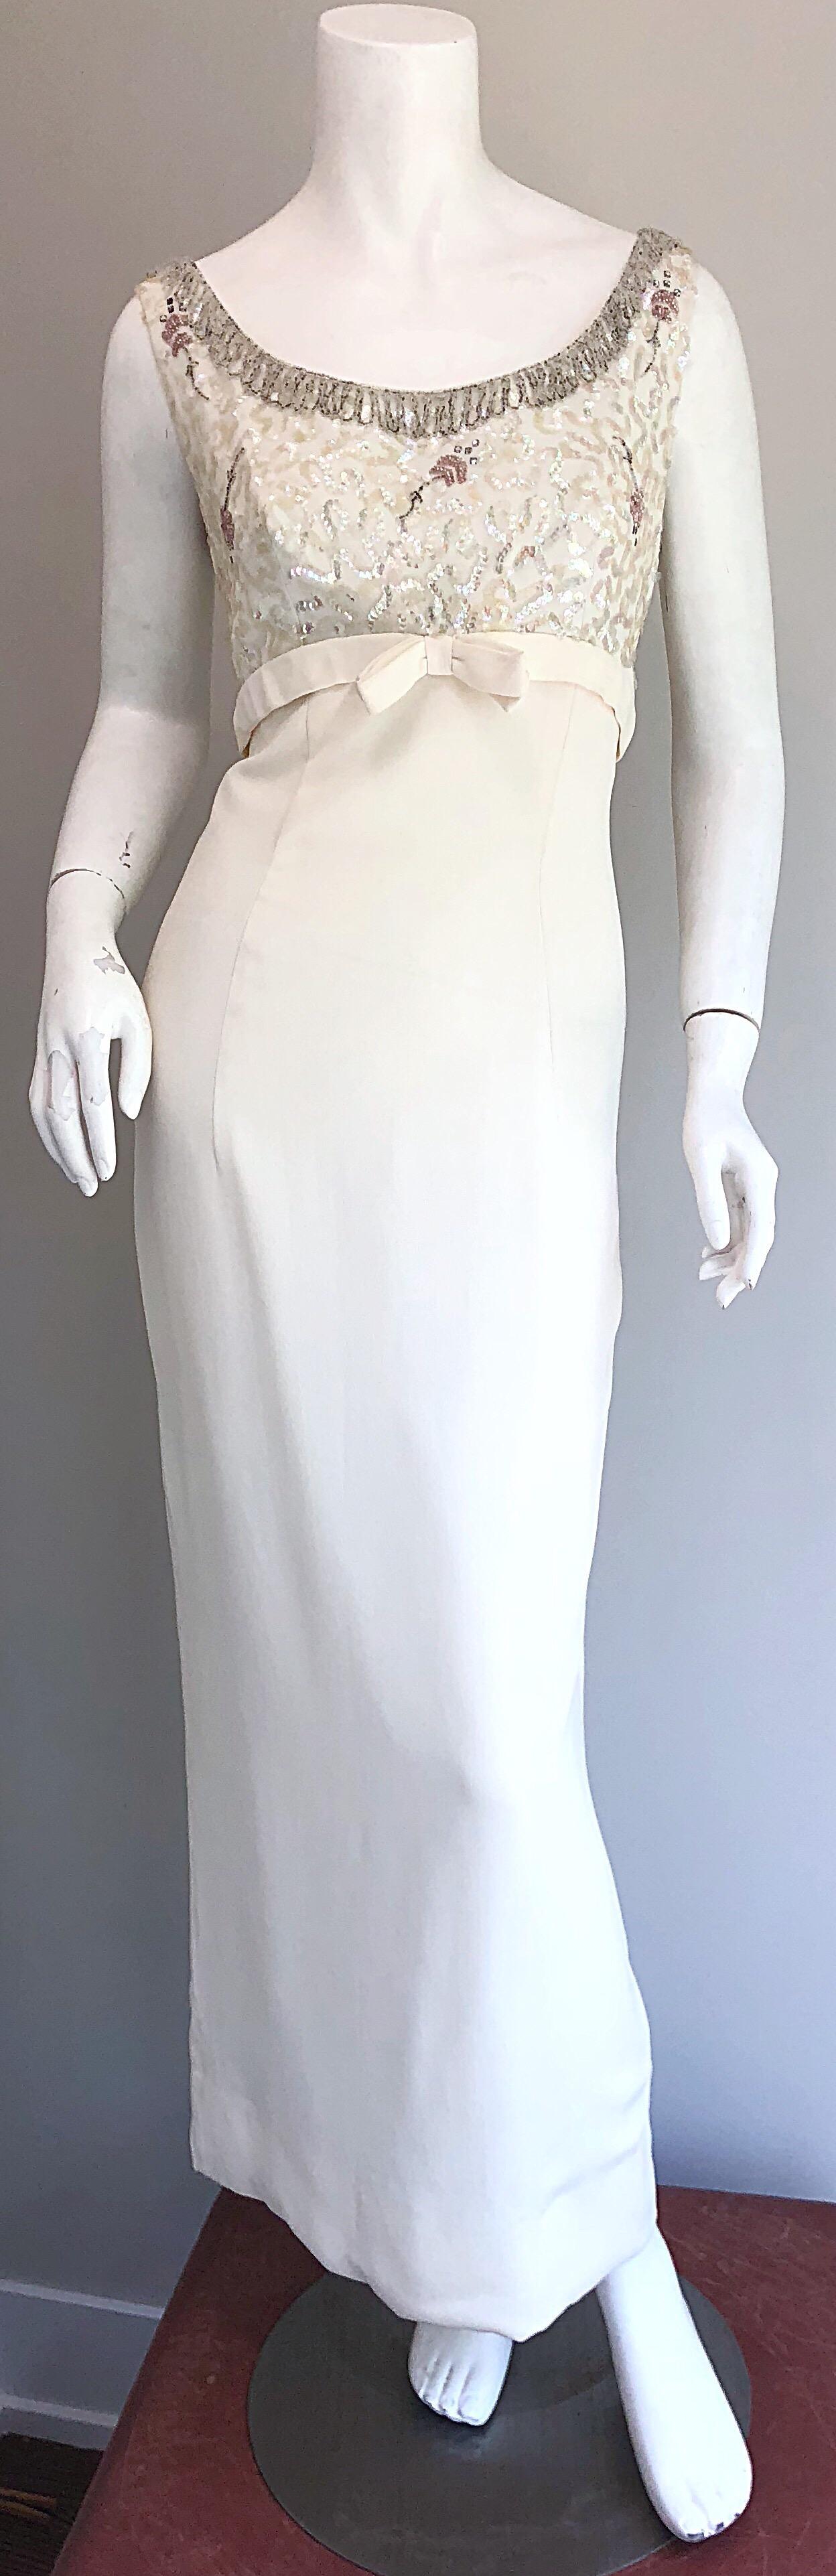 Gorgeous early 1960s white crepe sequined and beaded full length sleeveless evening dress! Features a fitted bodice with hundreds of hand-sewn iridescent sequins and beads. Tassel fringe beaded detail along the neck. Chic bow detail at empire waist.